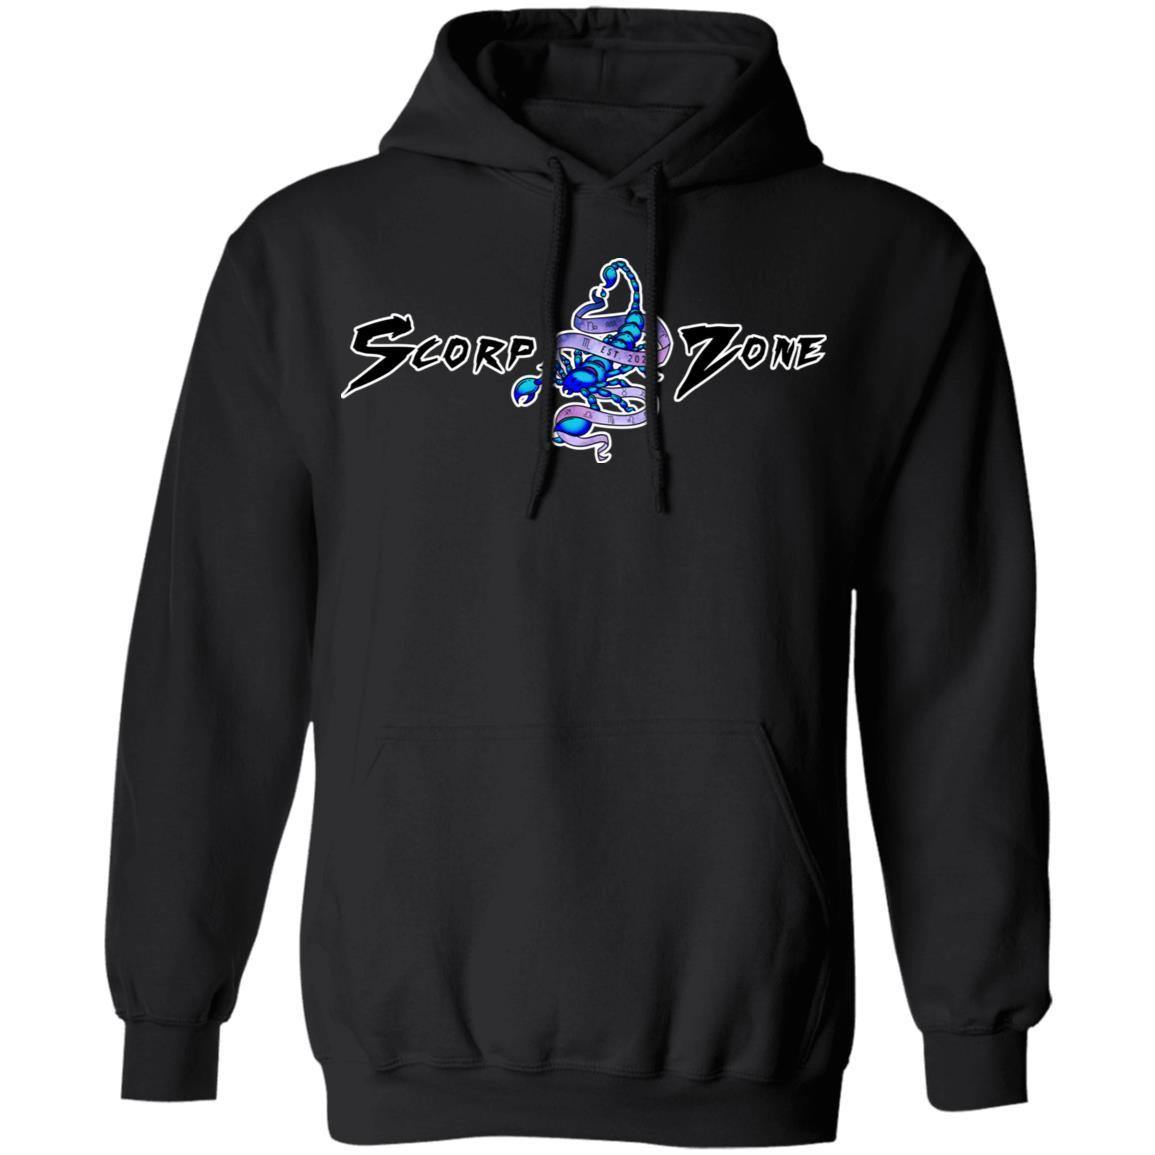 SCORPIO DESIGN ON BACK AND SMALL SCORP ZONE LOGO ON FRONT -  Z66 Pullover Hoodie - ScorpZone